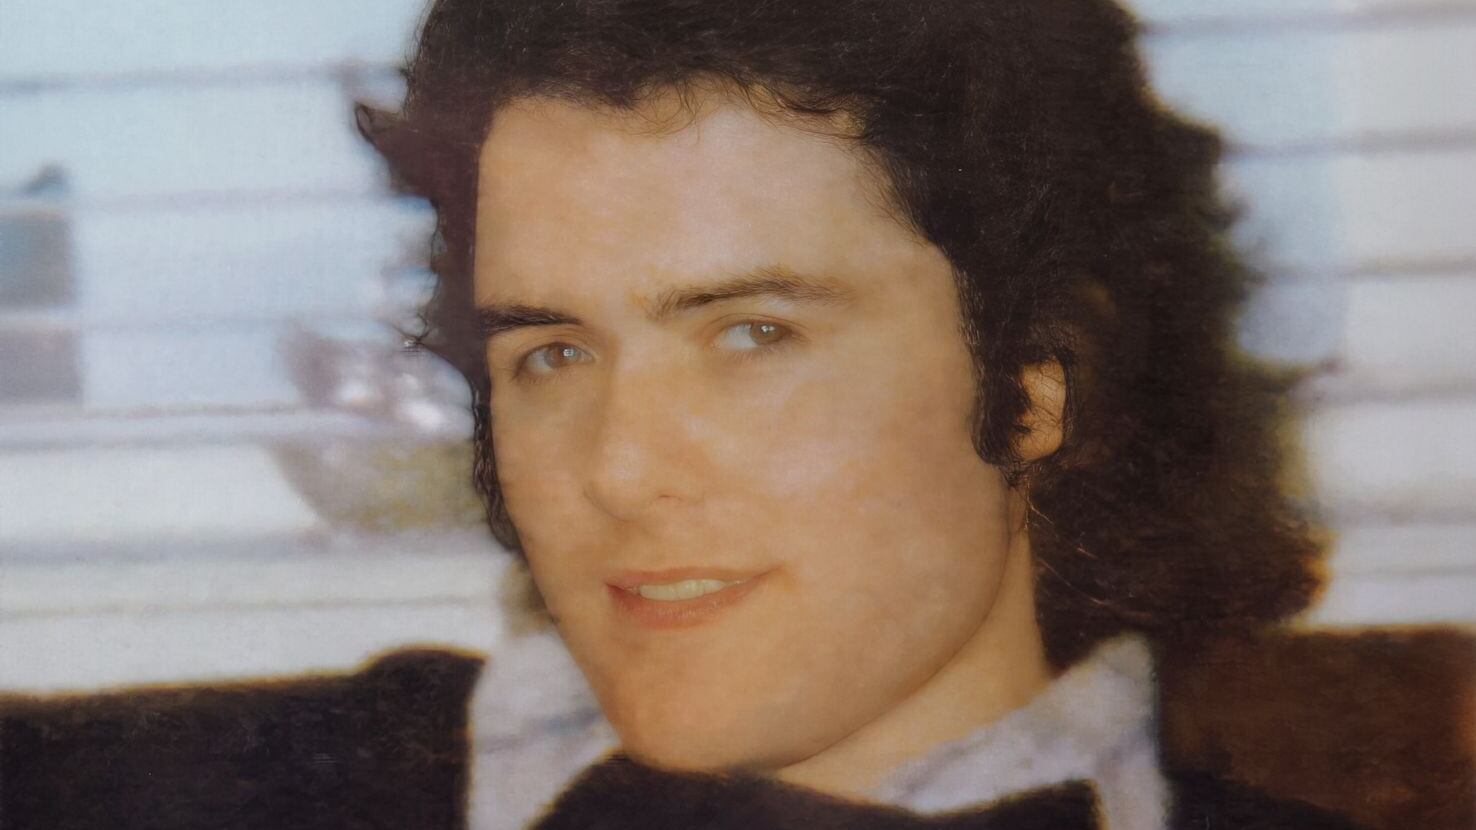 Michael Kearney, killed by the IRA in 1979, aged 20, on the grounds that he was an informer. Many years later the IRA accepted that he had not been an informer. PICTURE. MAL MCCANN